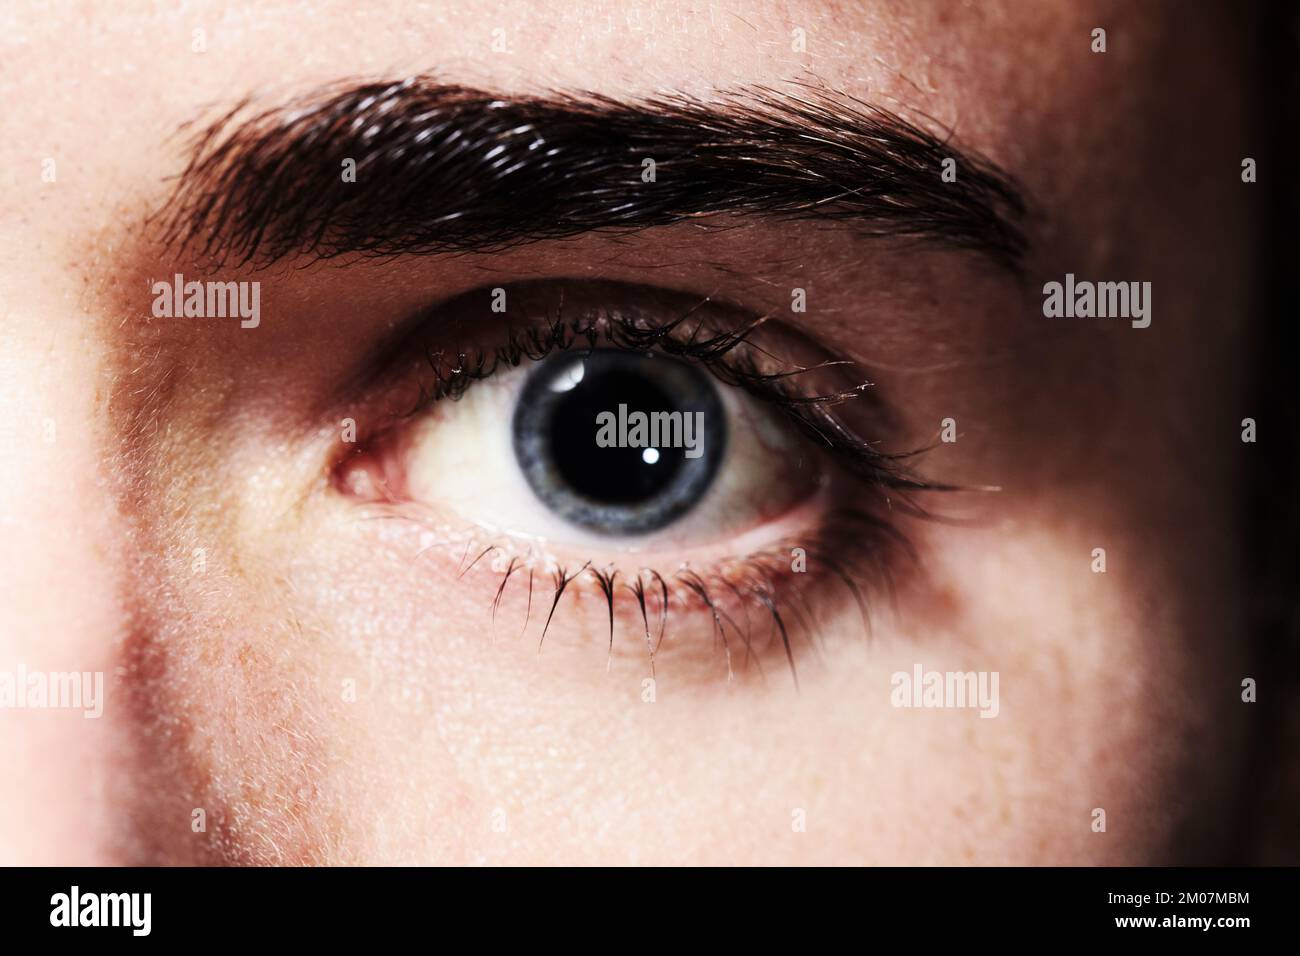 Seeing something he likes. Closeup portrait of an eye with dilated pupil. Stock Photo